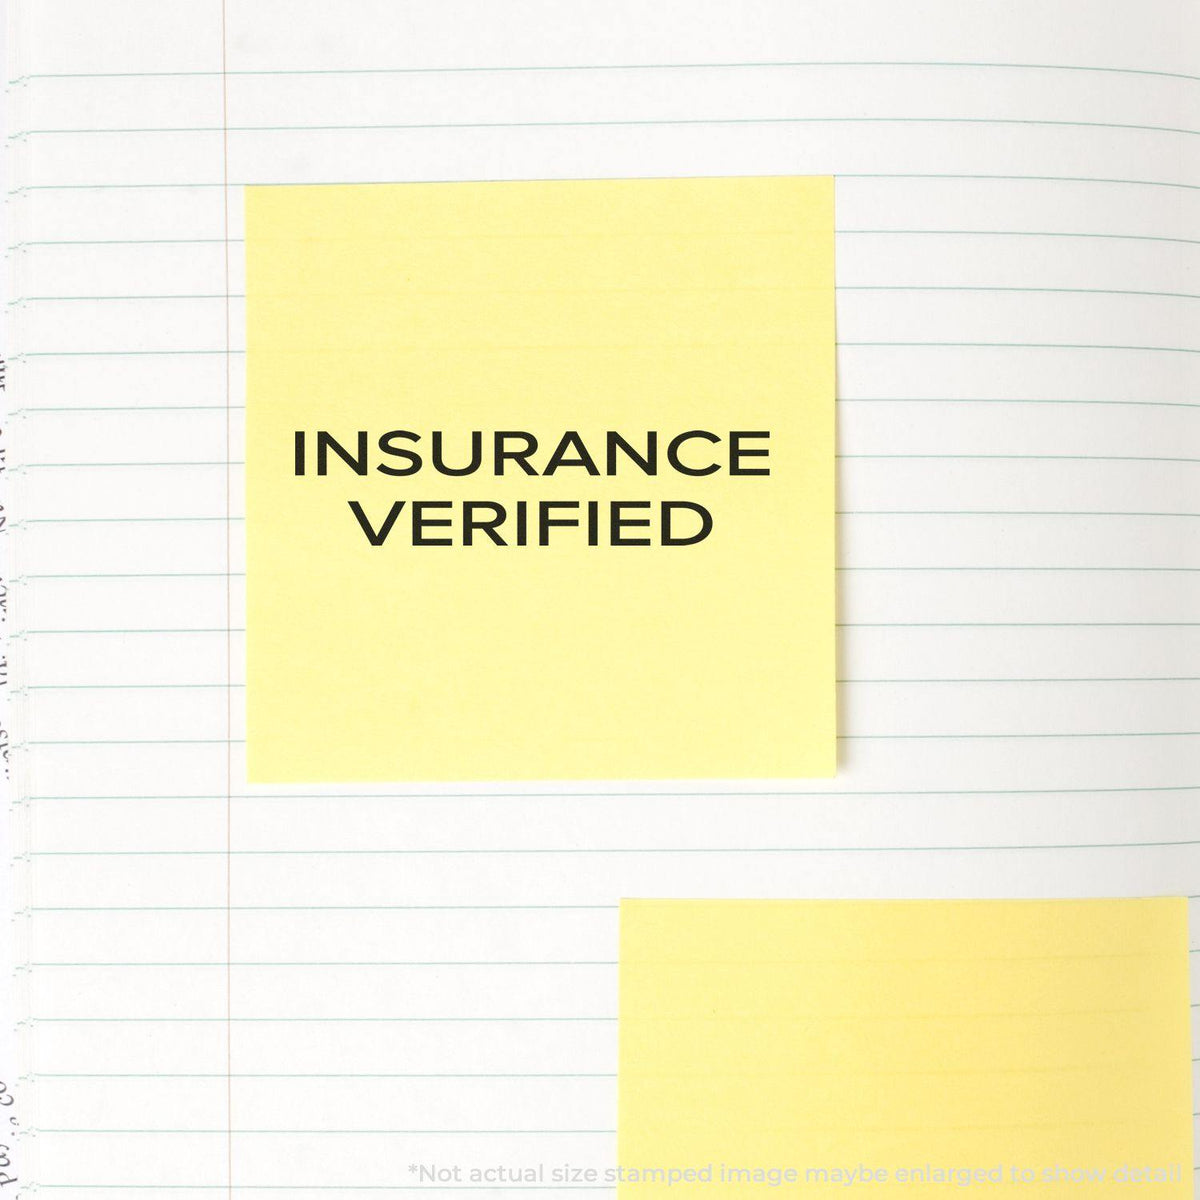 Large Narrow Font Insurance Verified Rubber Stamp In Use Photo